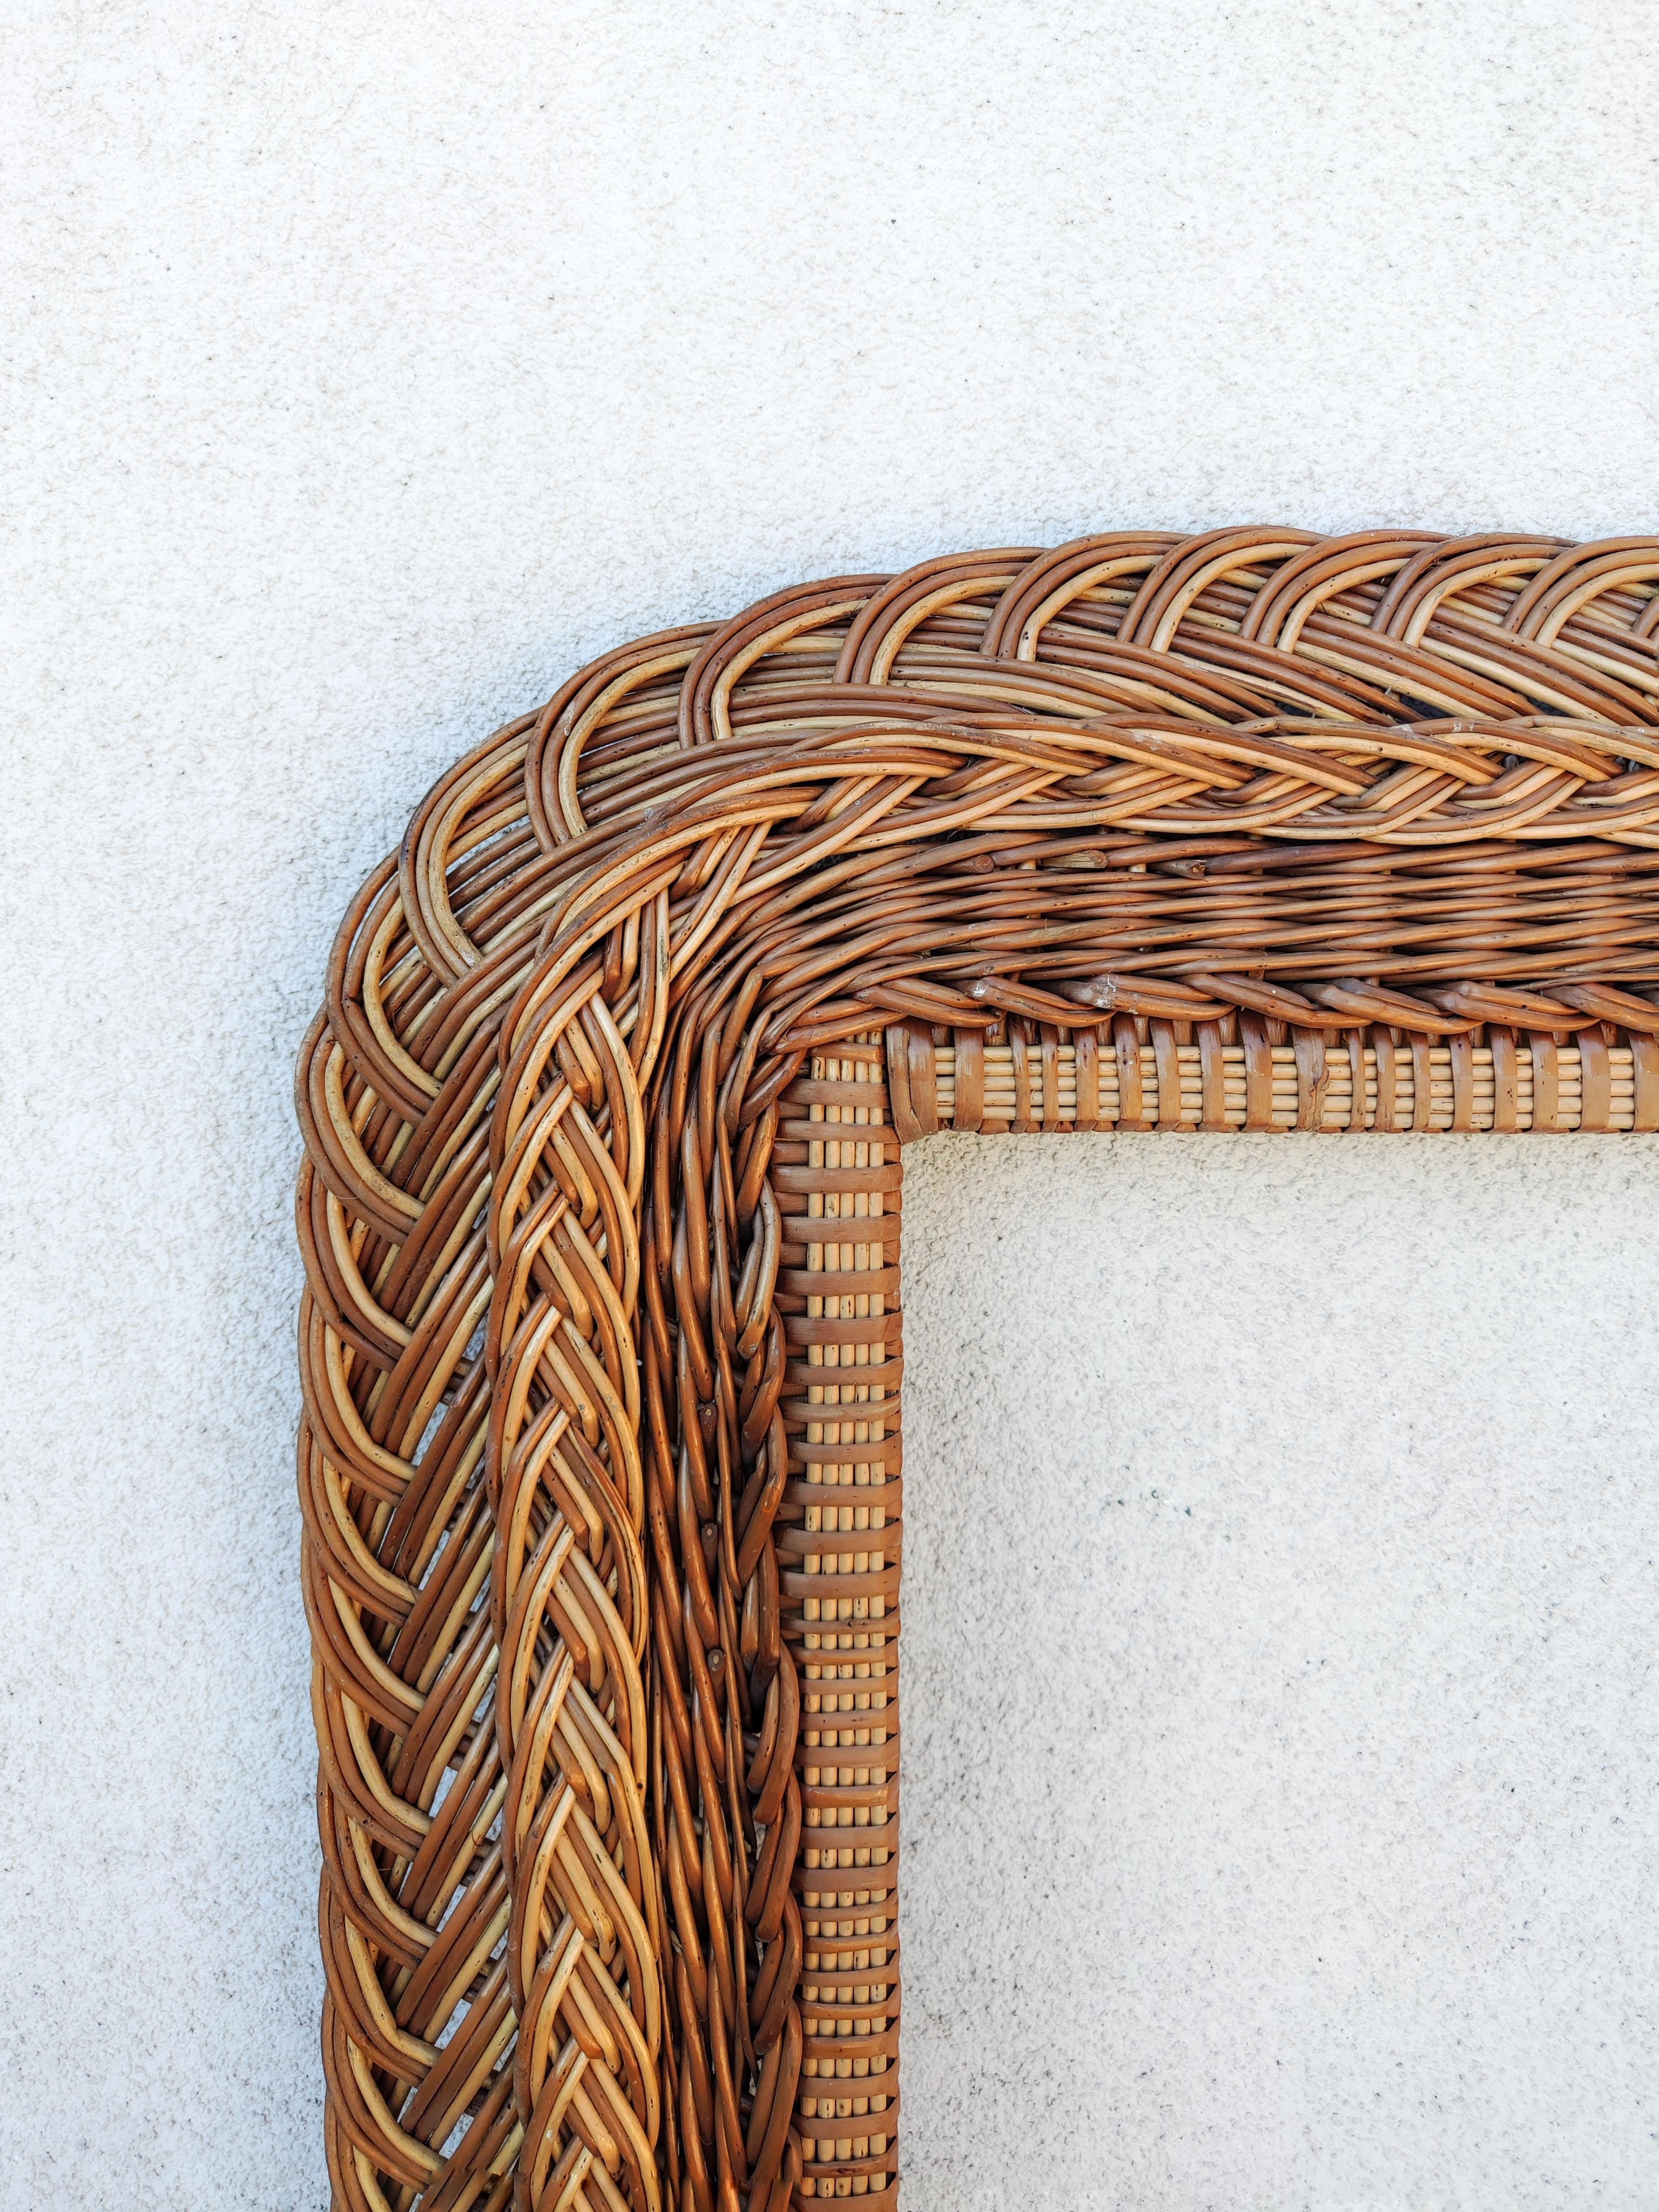 In this listing you will find a striking extra large Mid Century Modern Mirror rectangular Frame done in hand-woven natural rattan. Made in Italy in 1960s.

It shows some signs of time and use, like some fading and a small part where the couple of